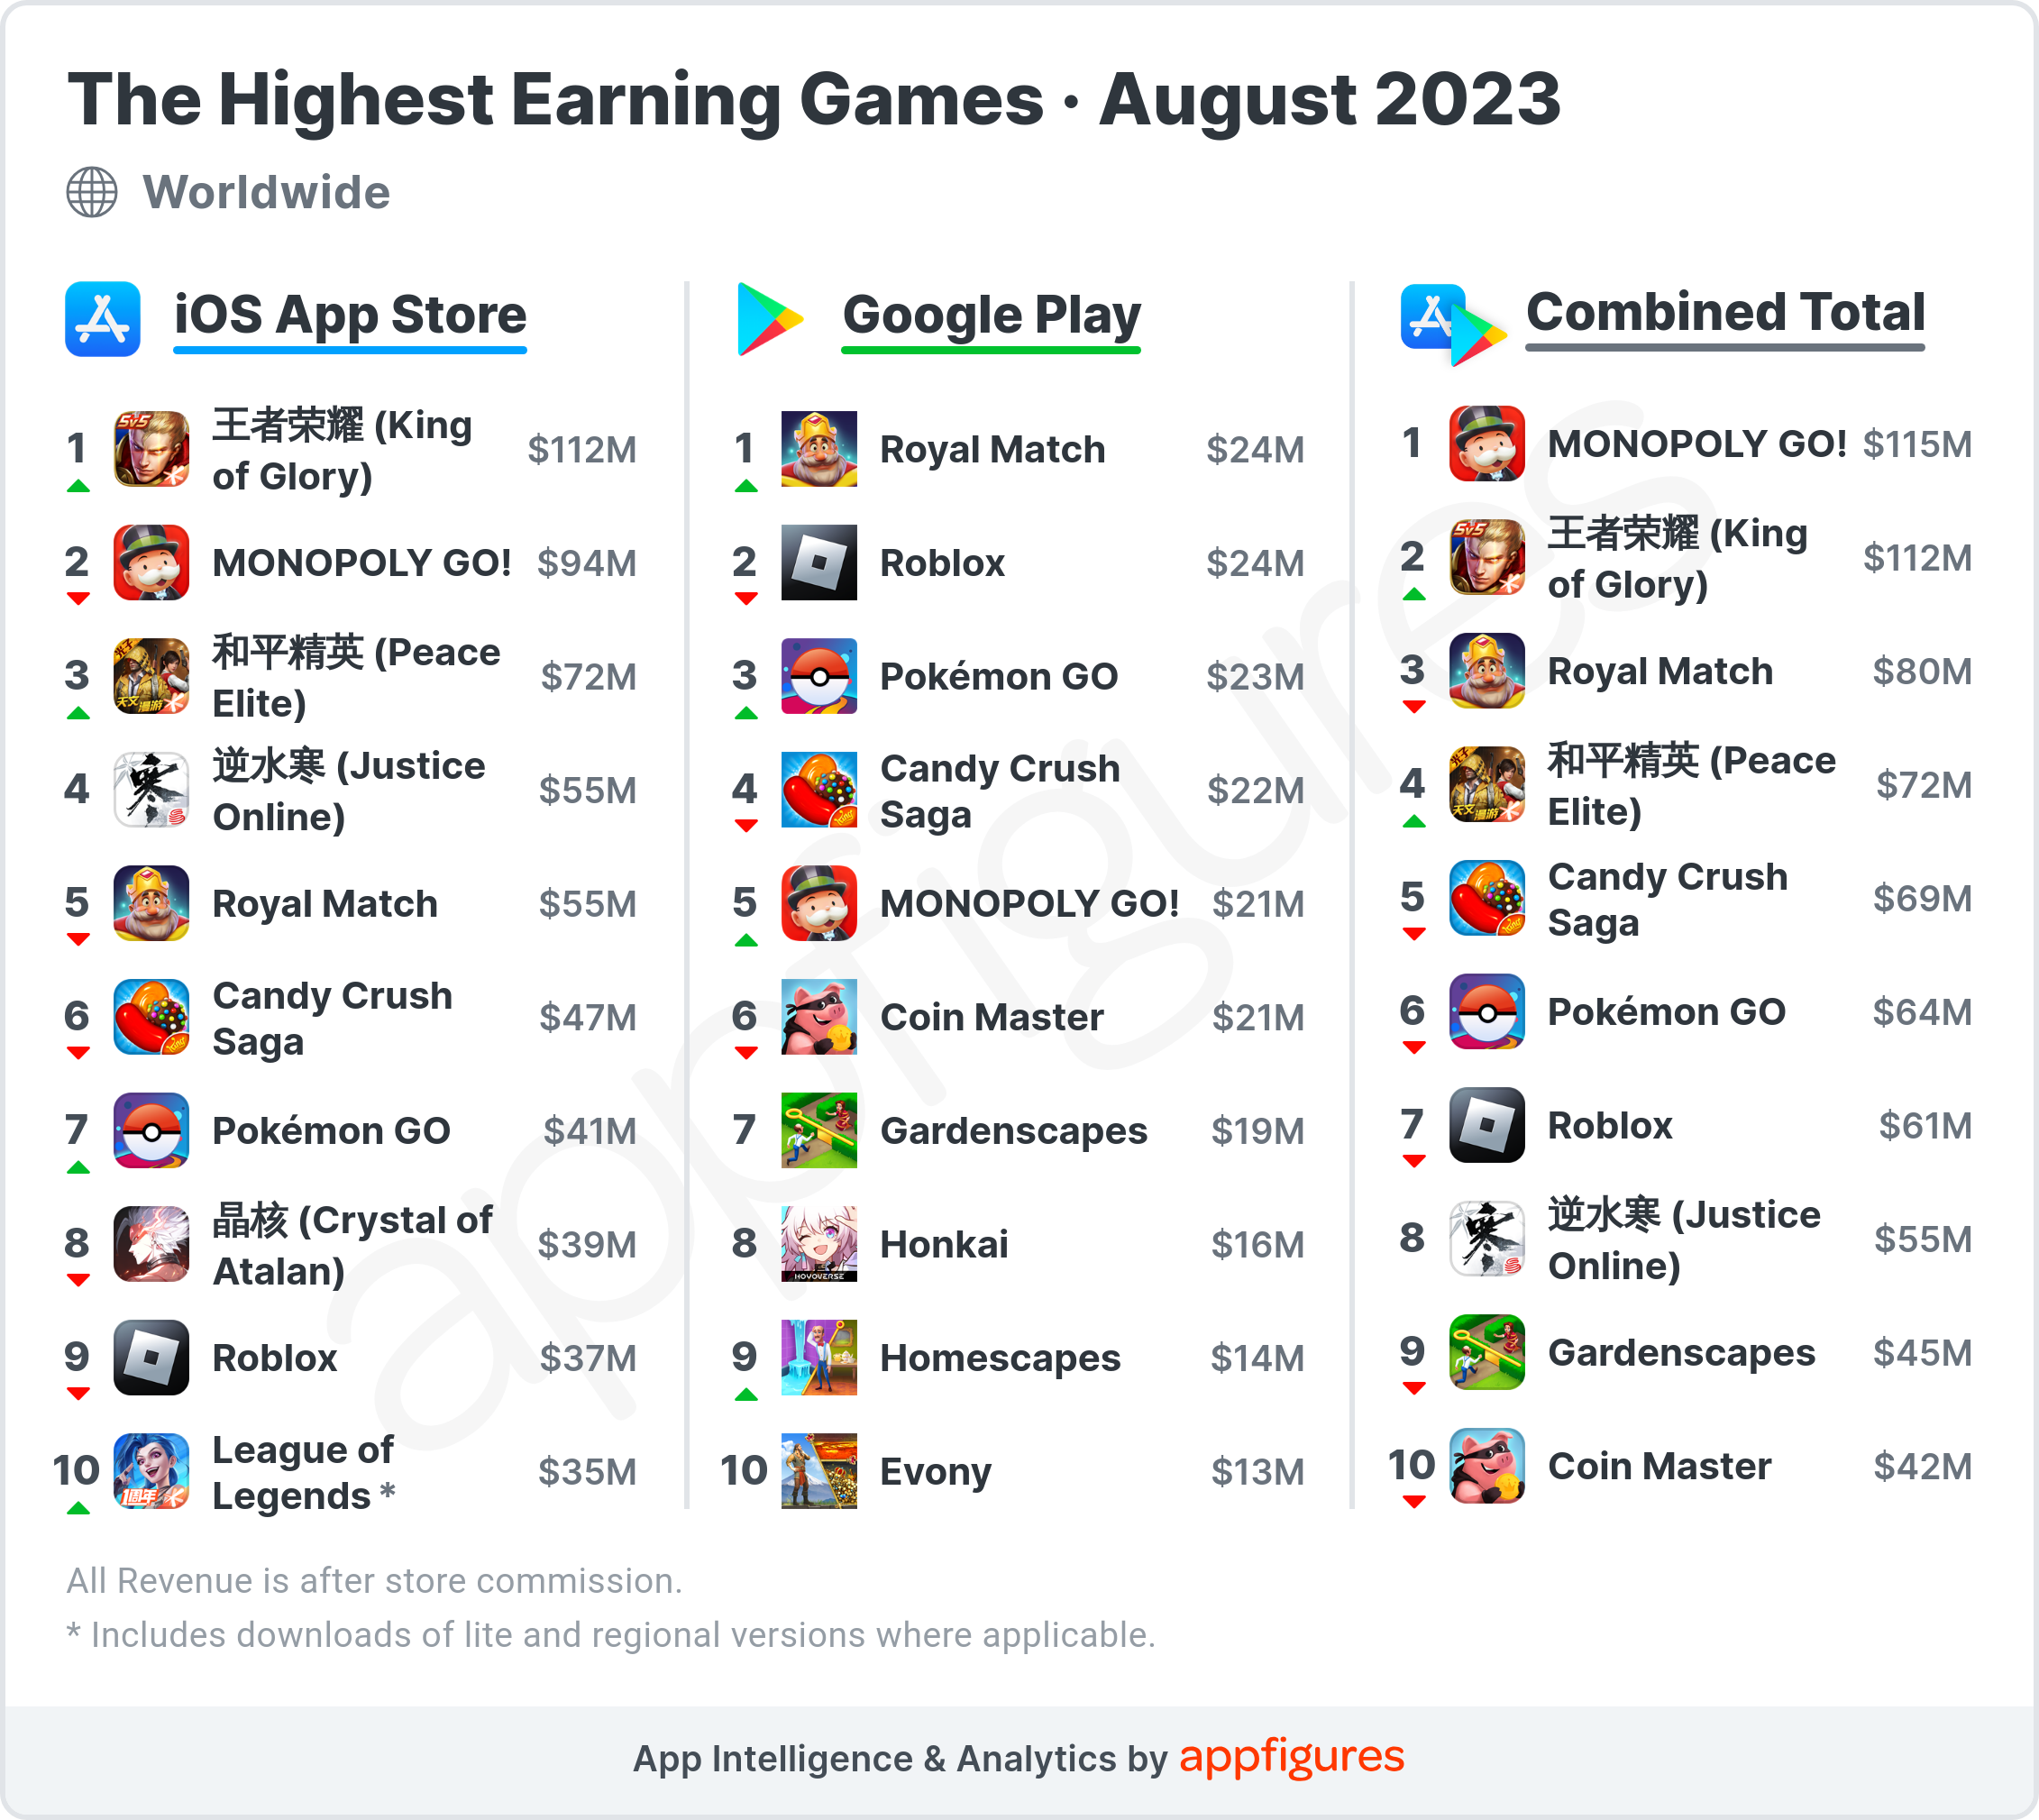 Highest-earning mobile games in the world in August 2023